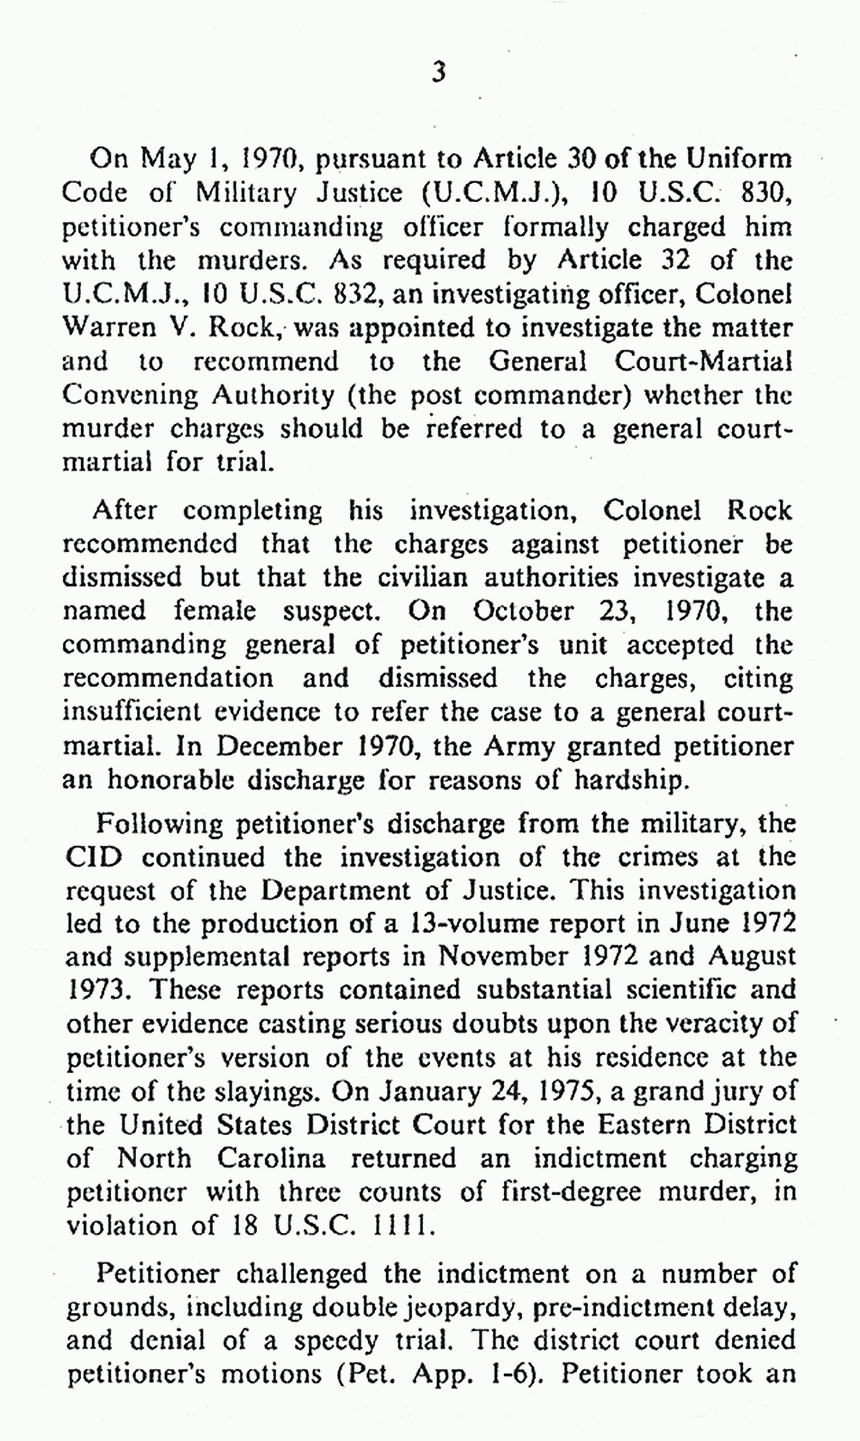 February 1979: Supreme Court of the United States, On Petition for Writ of Certiorari to the U. S. Court of Appeals for the 4th Circuit: Brief for the United States in Opposition, p. 3 of 9